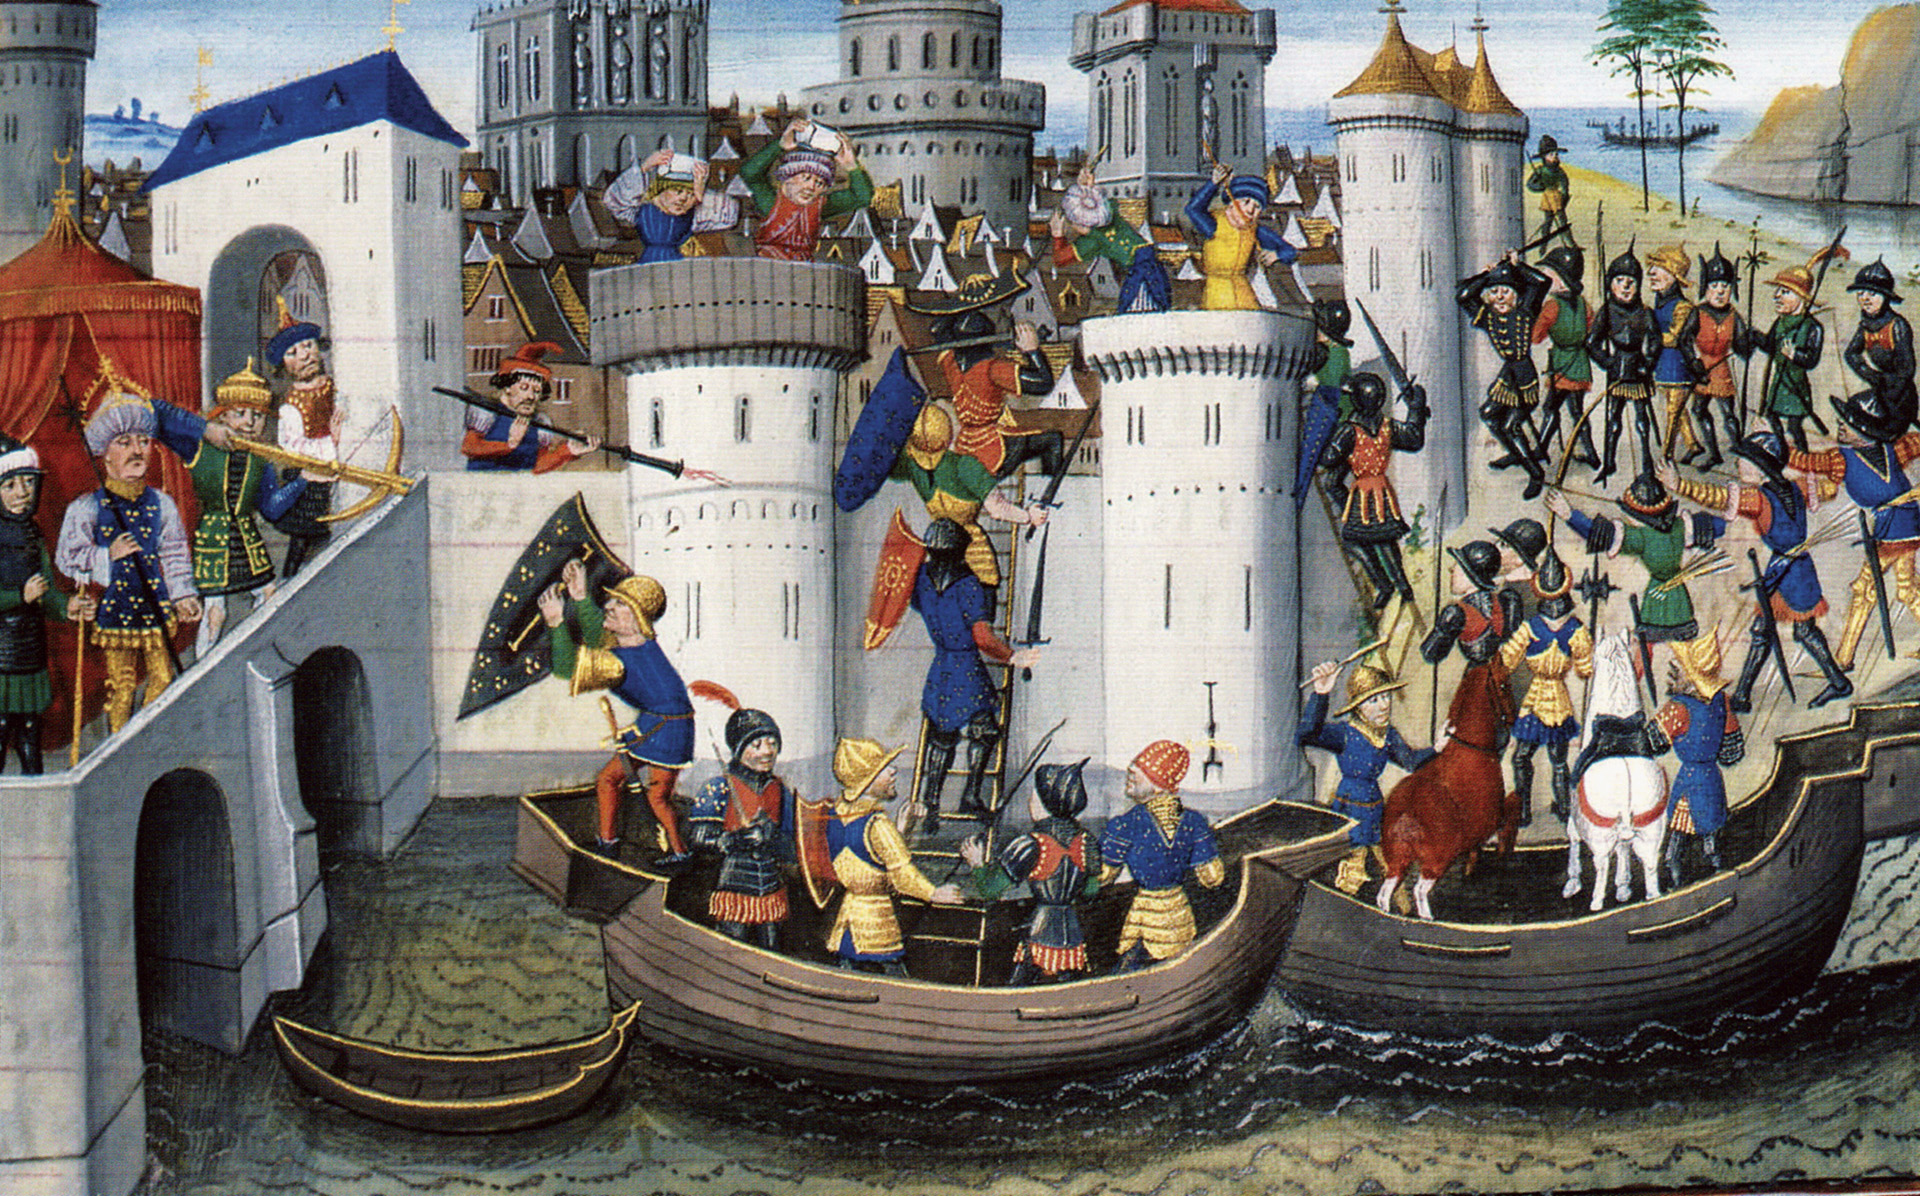 Venetians attack the seaward wall along the Golden Horn while crusaders attack the land wall in a 15th-century illuminated manuscript. The successful initial siege of Constantinople in July 1203 enabled the Latin crusaders to install puppet emperor Alexius IV.